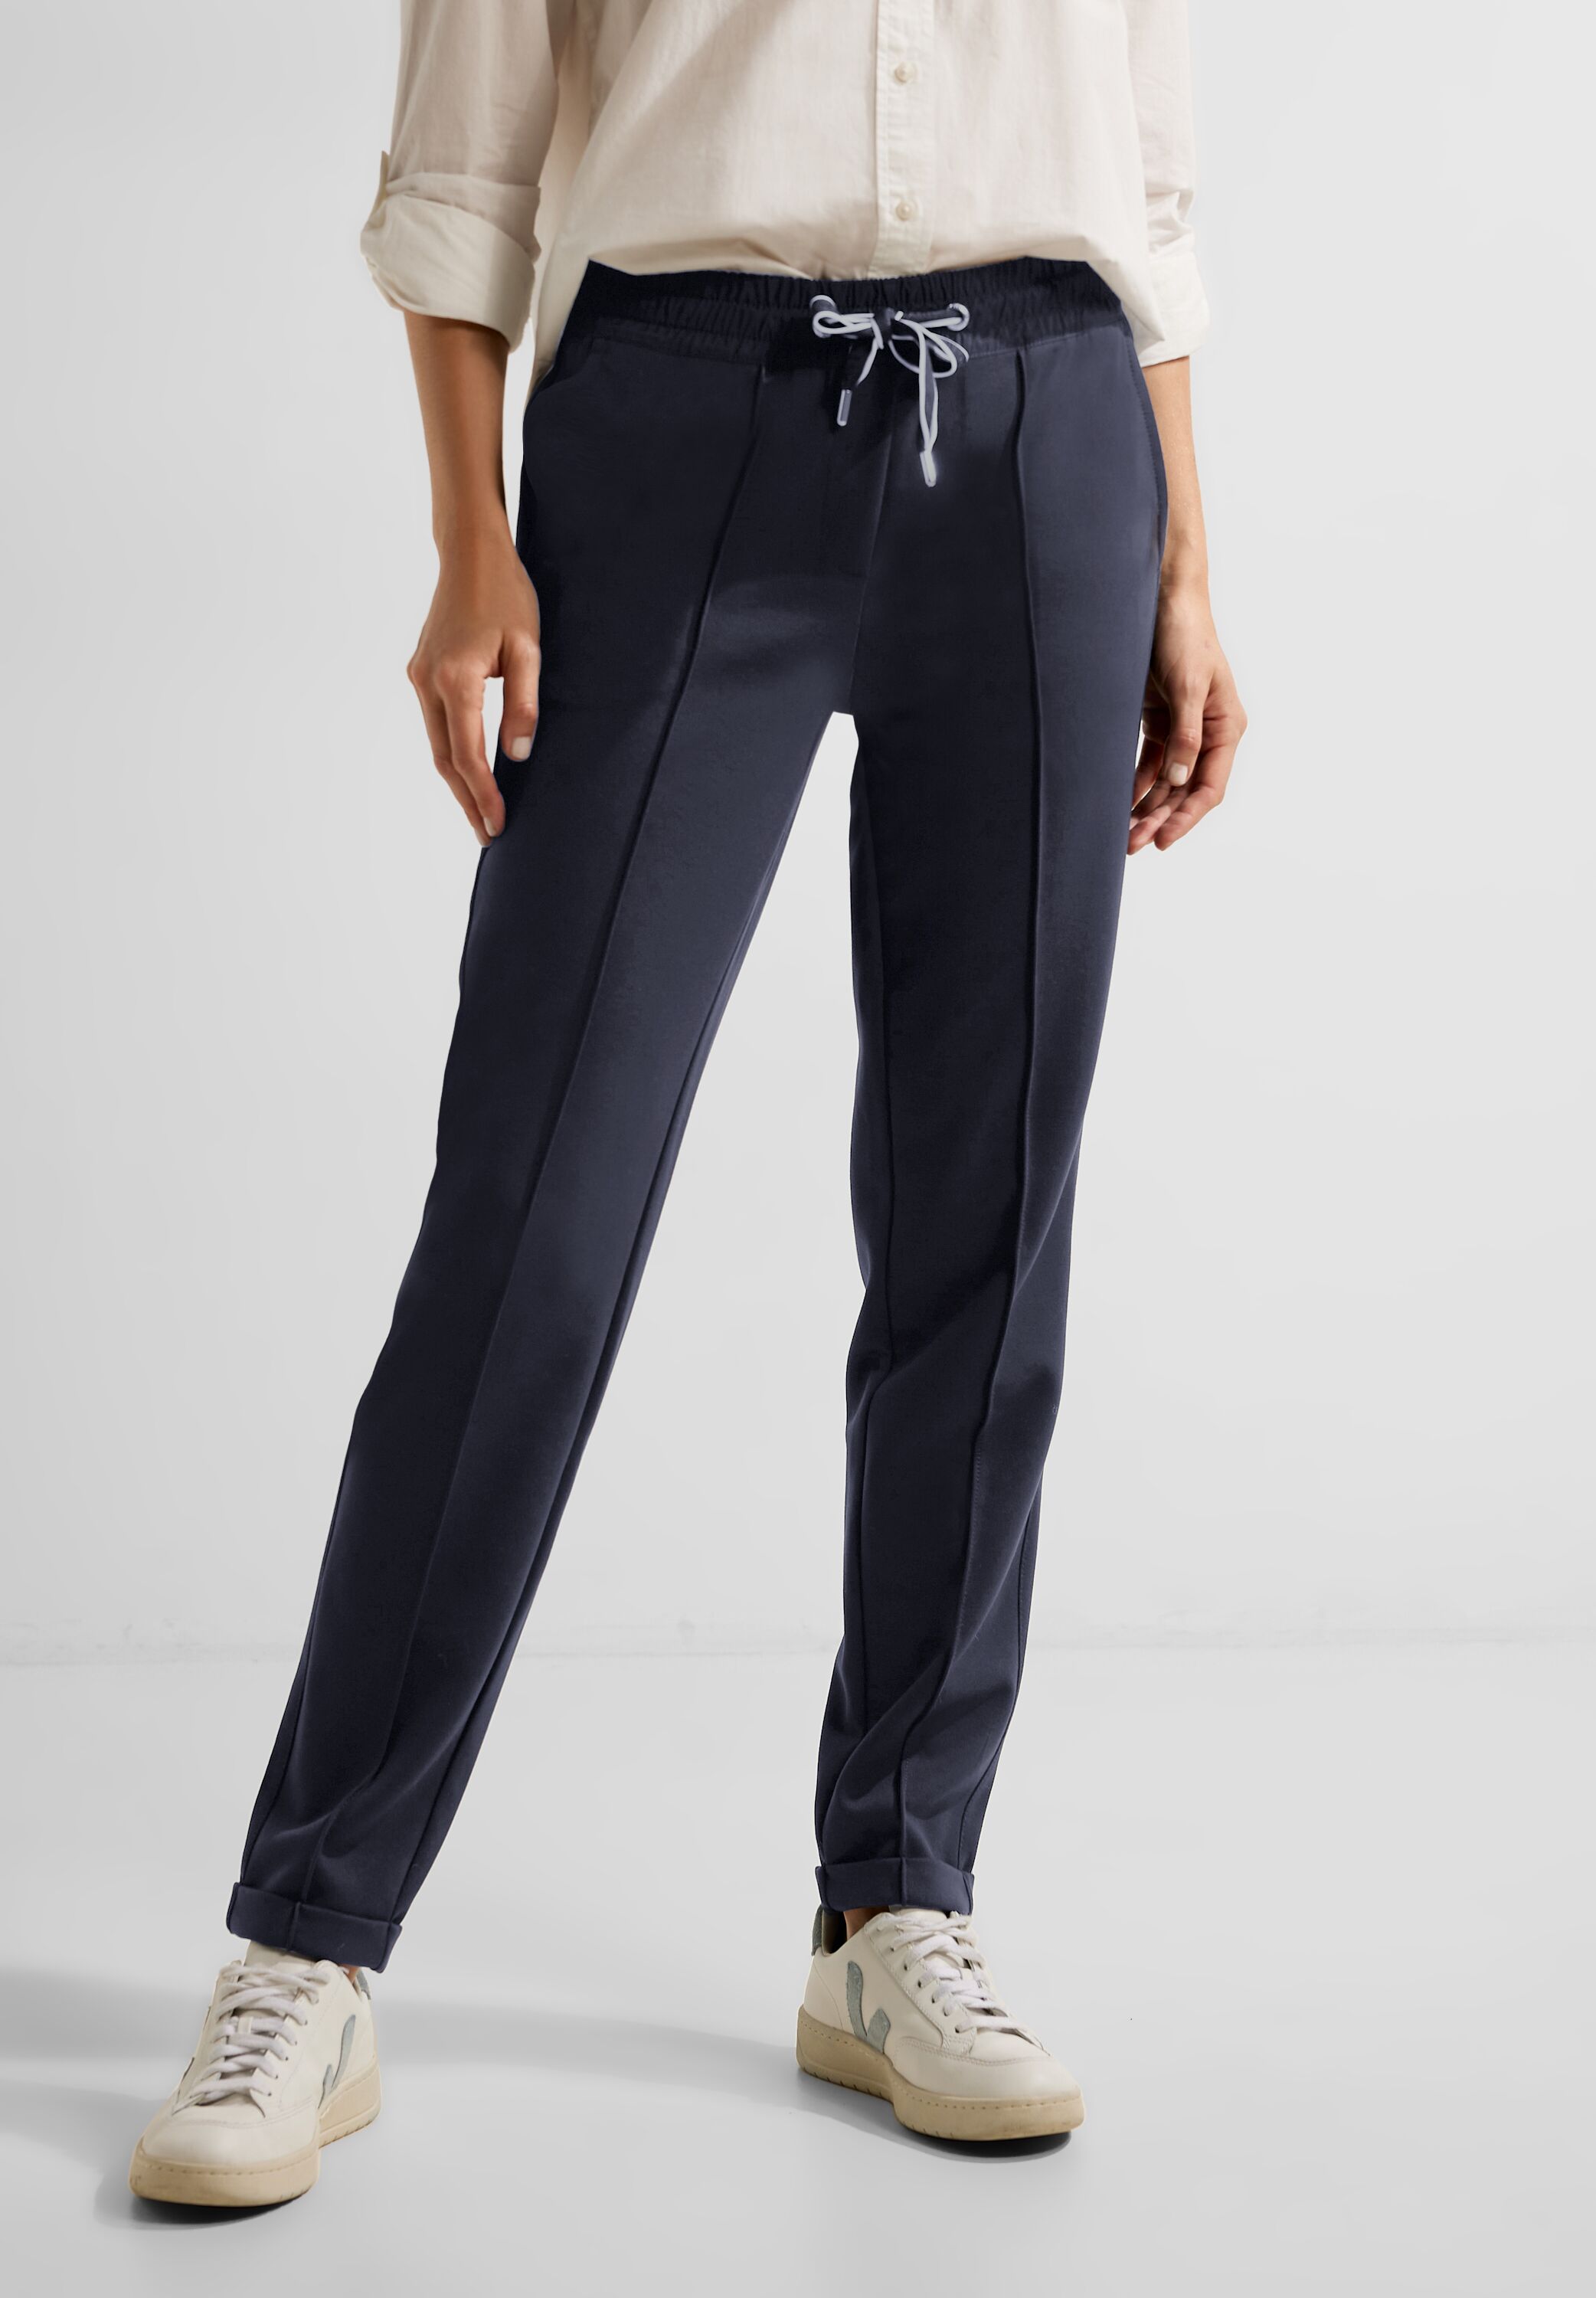 CECIL Joggpant Tracey in Night Sky Blue im SALE reduziert B376939-14077 -  CONCEPT Mode